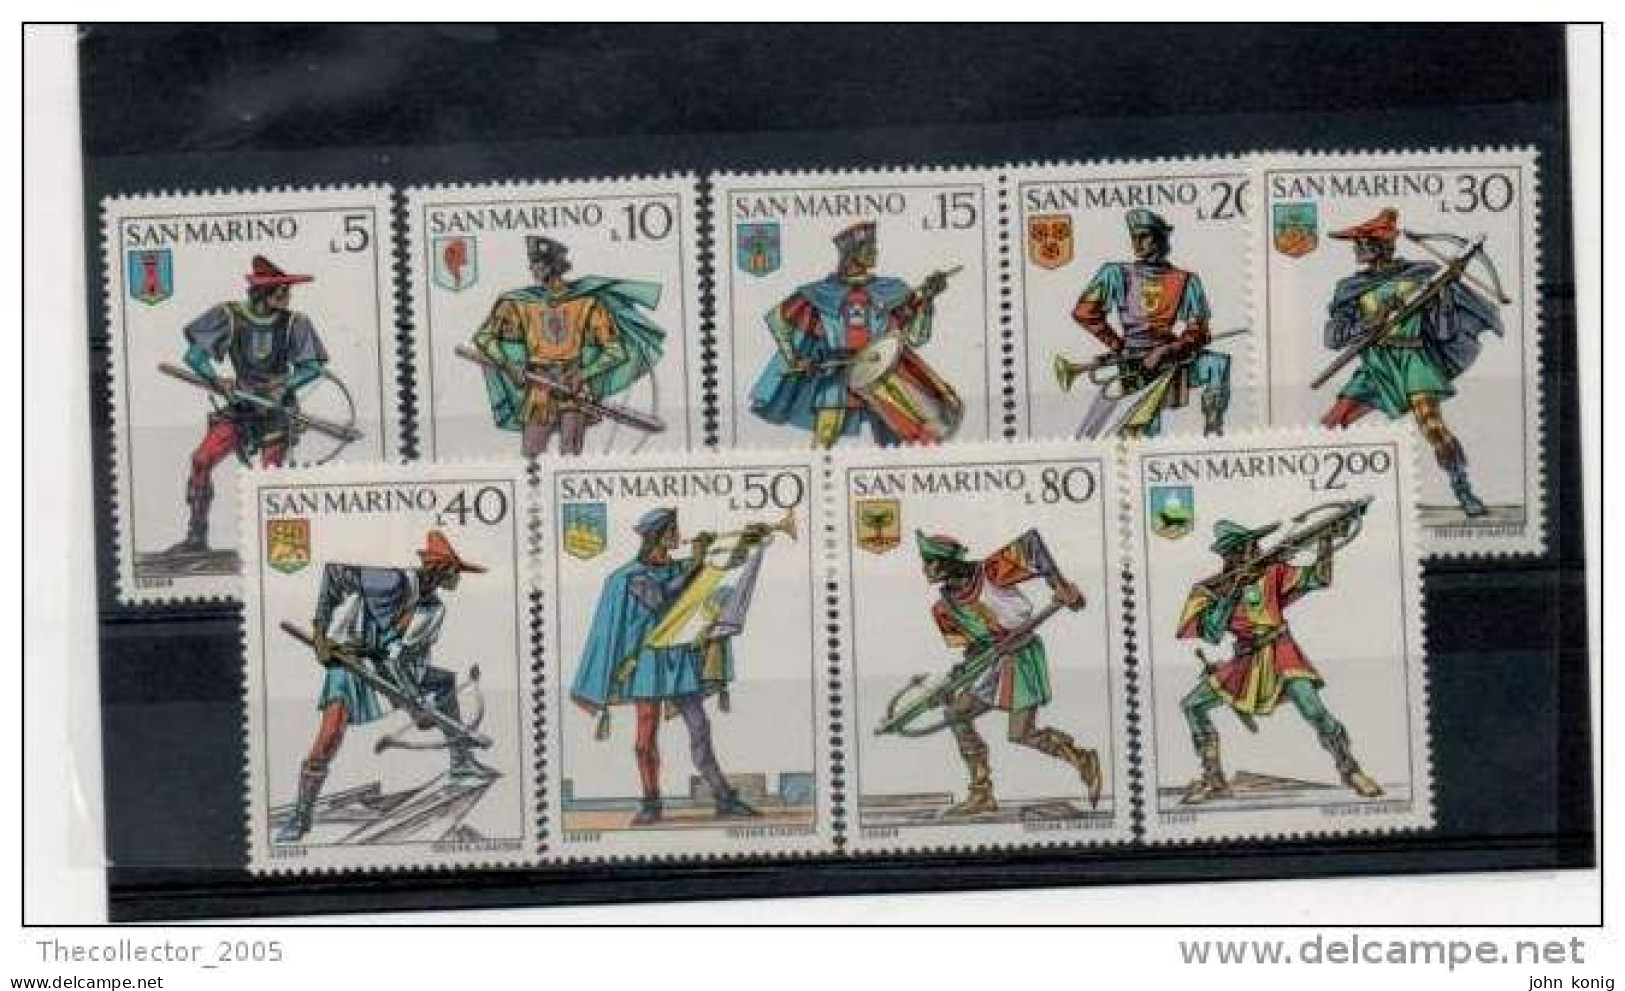 SAN MARINO - LOTTO FRANCOBOLLI NUOVI (VEDI FOTO) - NEW-MINT STAMPS LOT (CROSSBOW GAMES) - Collections, Lots & Series